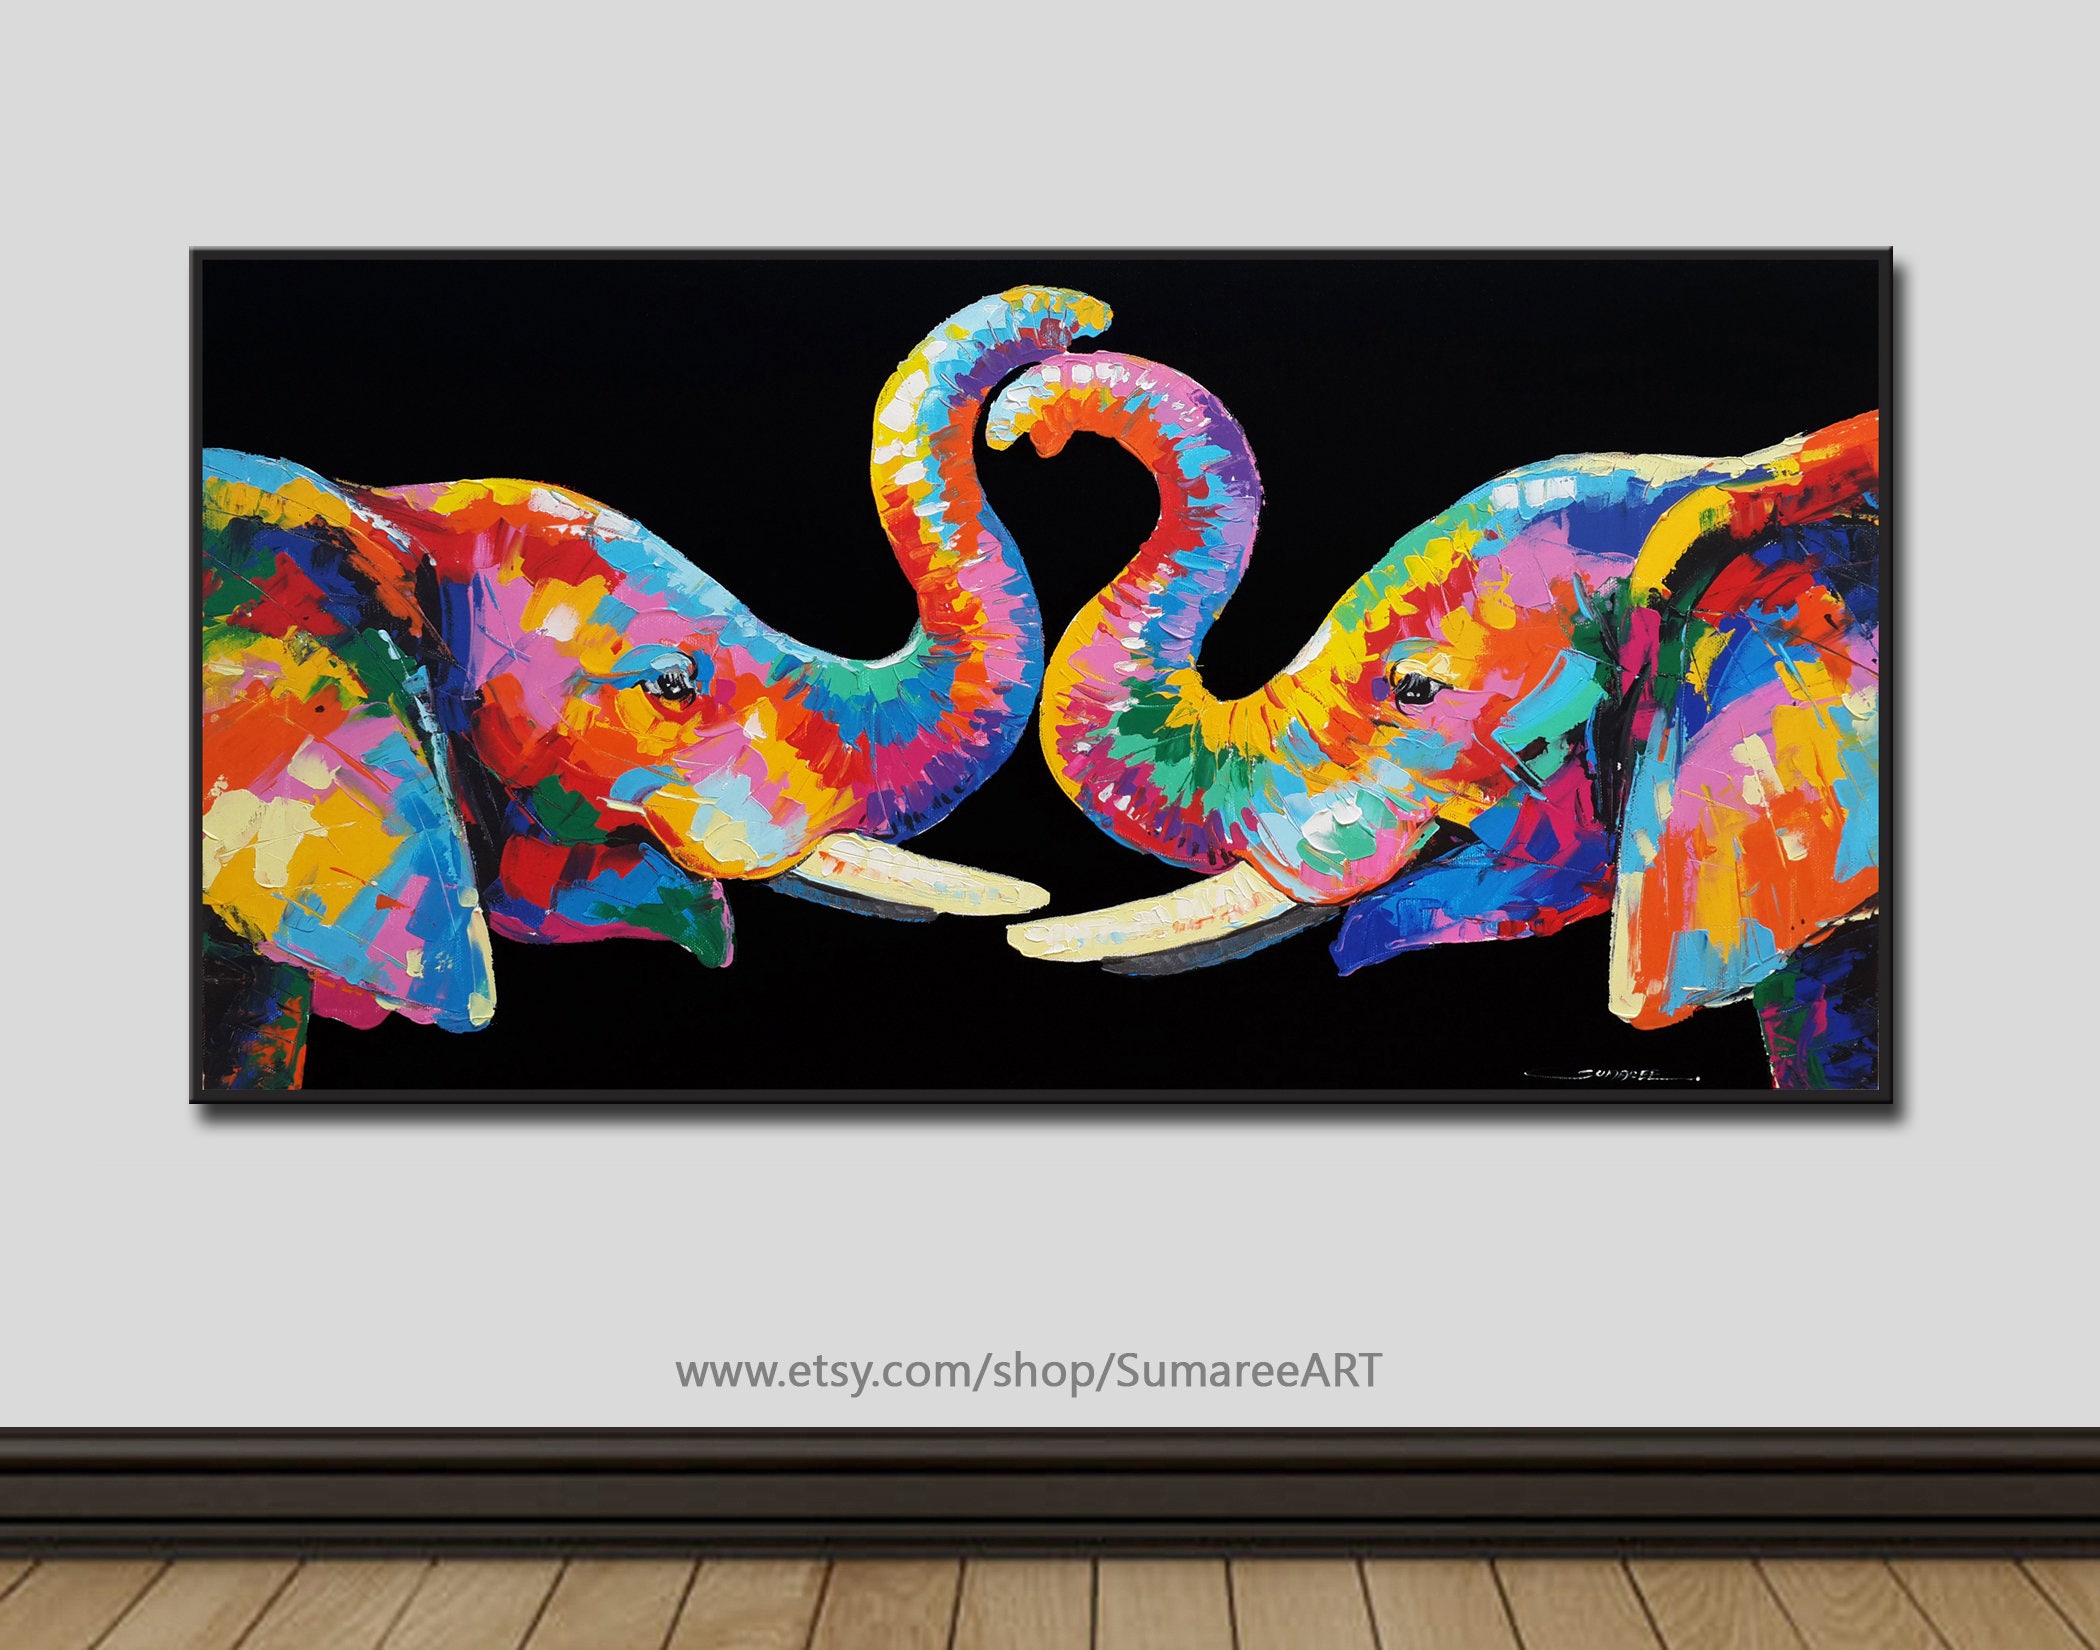 40 X 80 Cm Colorful Elephant Paintings Wall Decor Paintings Etsy